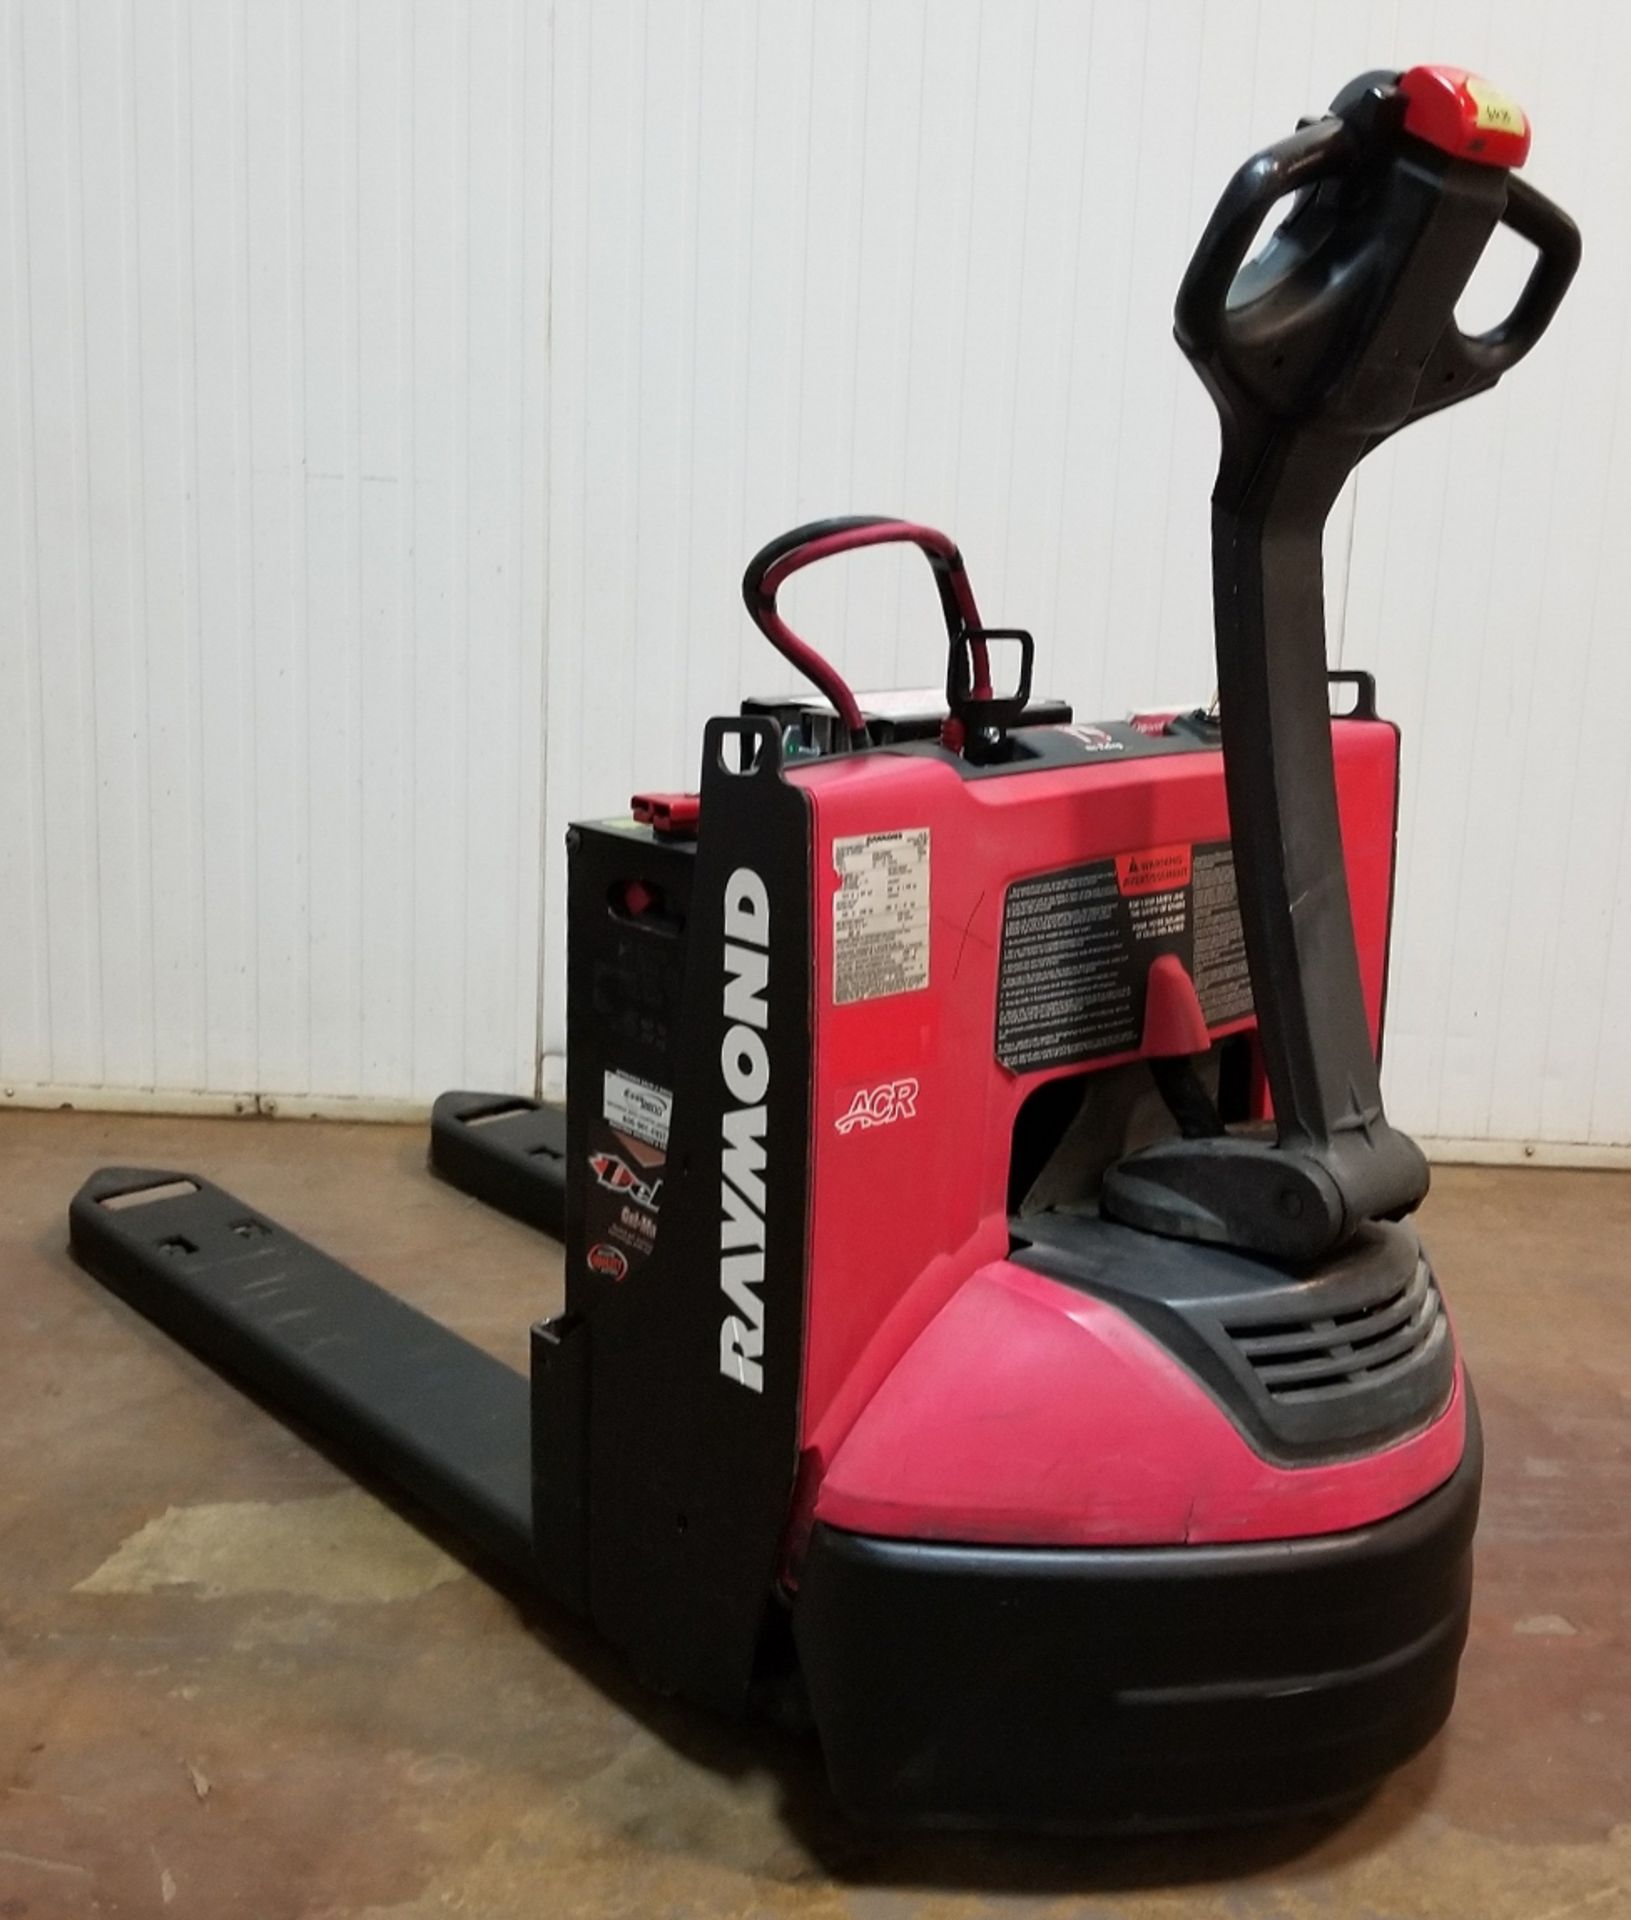 RAYMOND (2018) 8210 4,500 LB. CAPACITY 24V ELECTRIC WALK-BEHIND PALLET TRUCK WITH 120V PLUG-IN